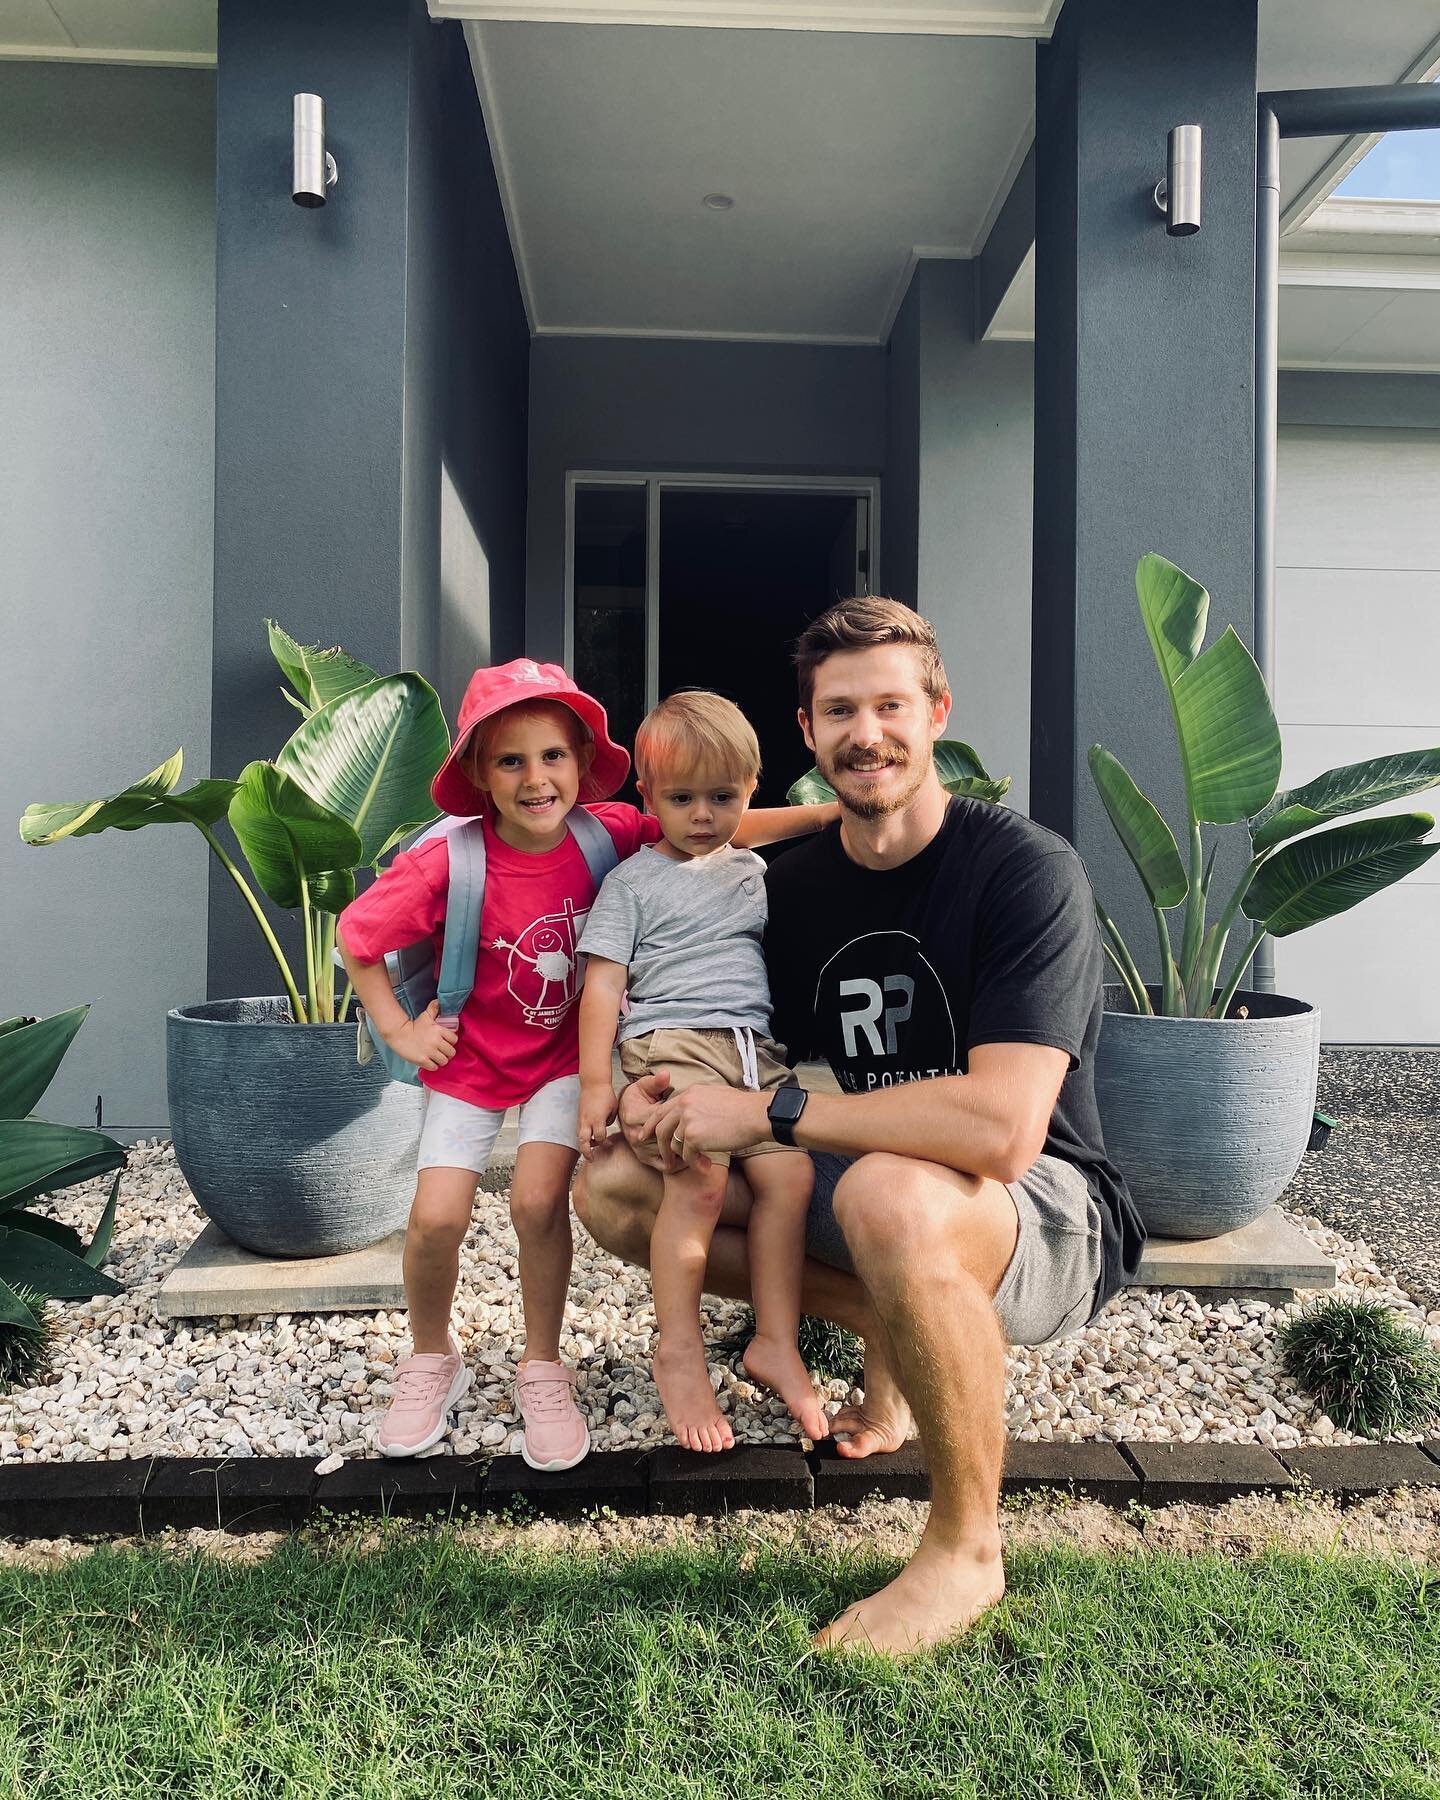 HAPPY FATHERS DAY

Being called &ldquo;Dad&rdquo; is a privilege and a gift. Grateful for the 2 cherubs I get to Father! 

Big shoutout to all the Dads in the Rehab Potential community.